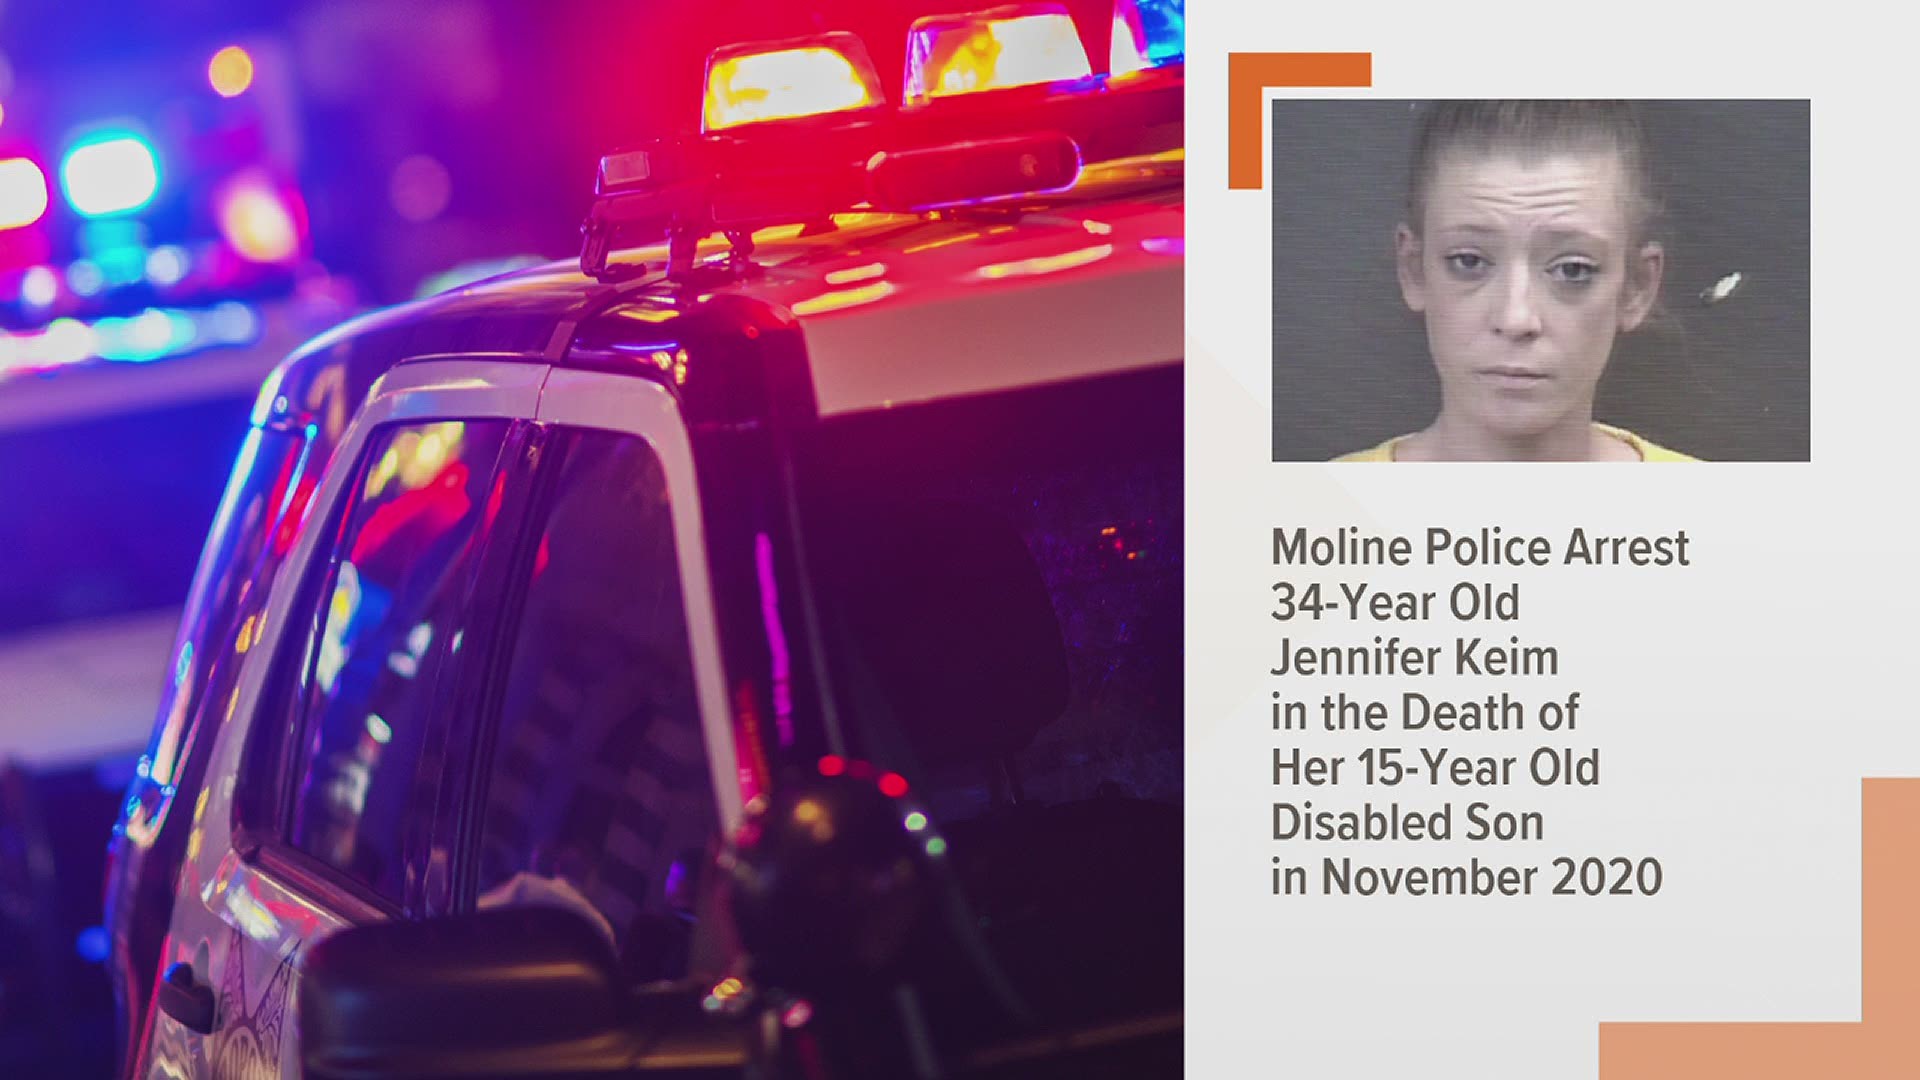 Jennifer Keim, 34, was arrested Monday, March 22, 2021 for the November 3, 2020 death of her 15-year-old son.